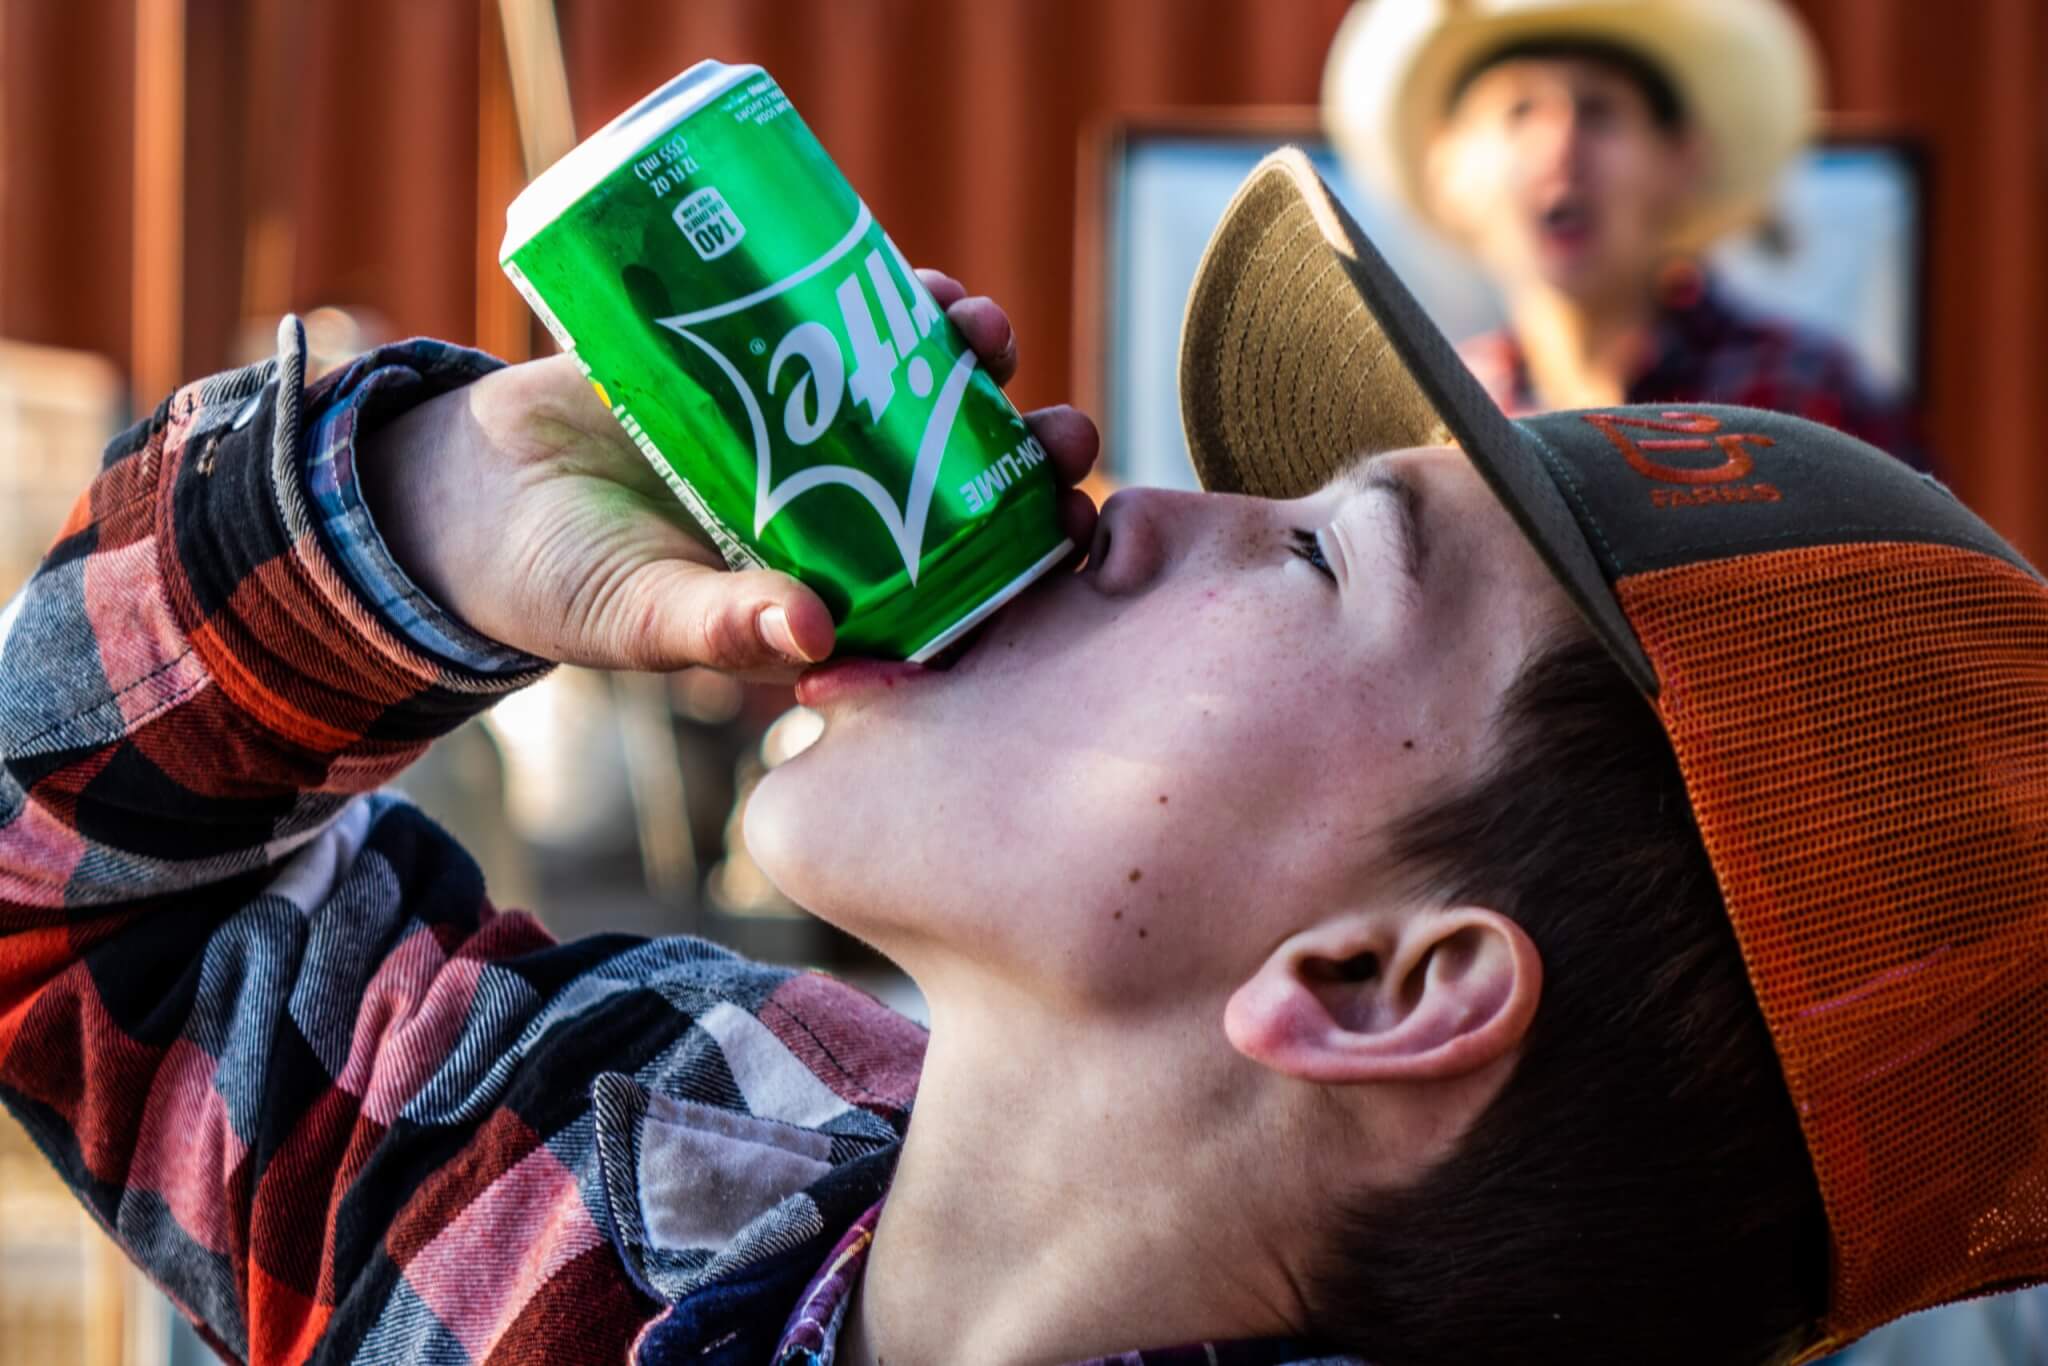 Child drinking a can of Sprite soda